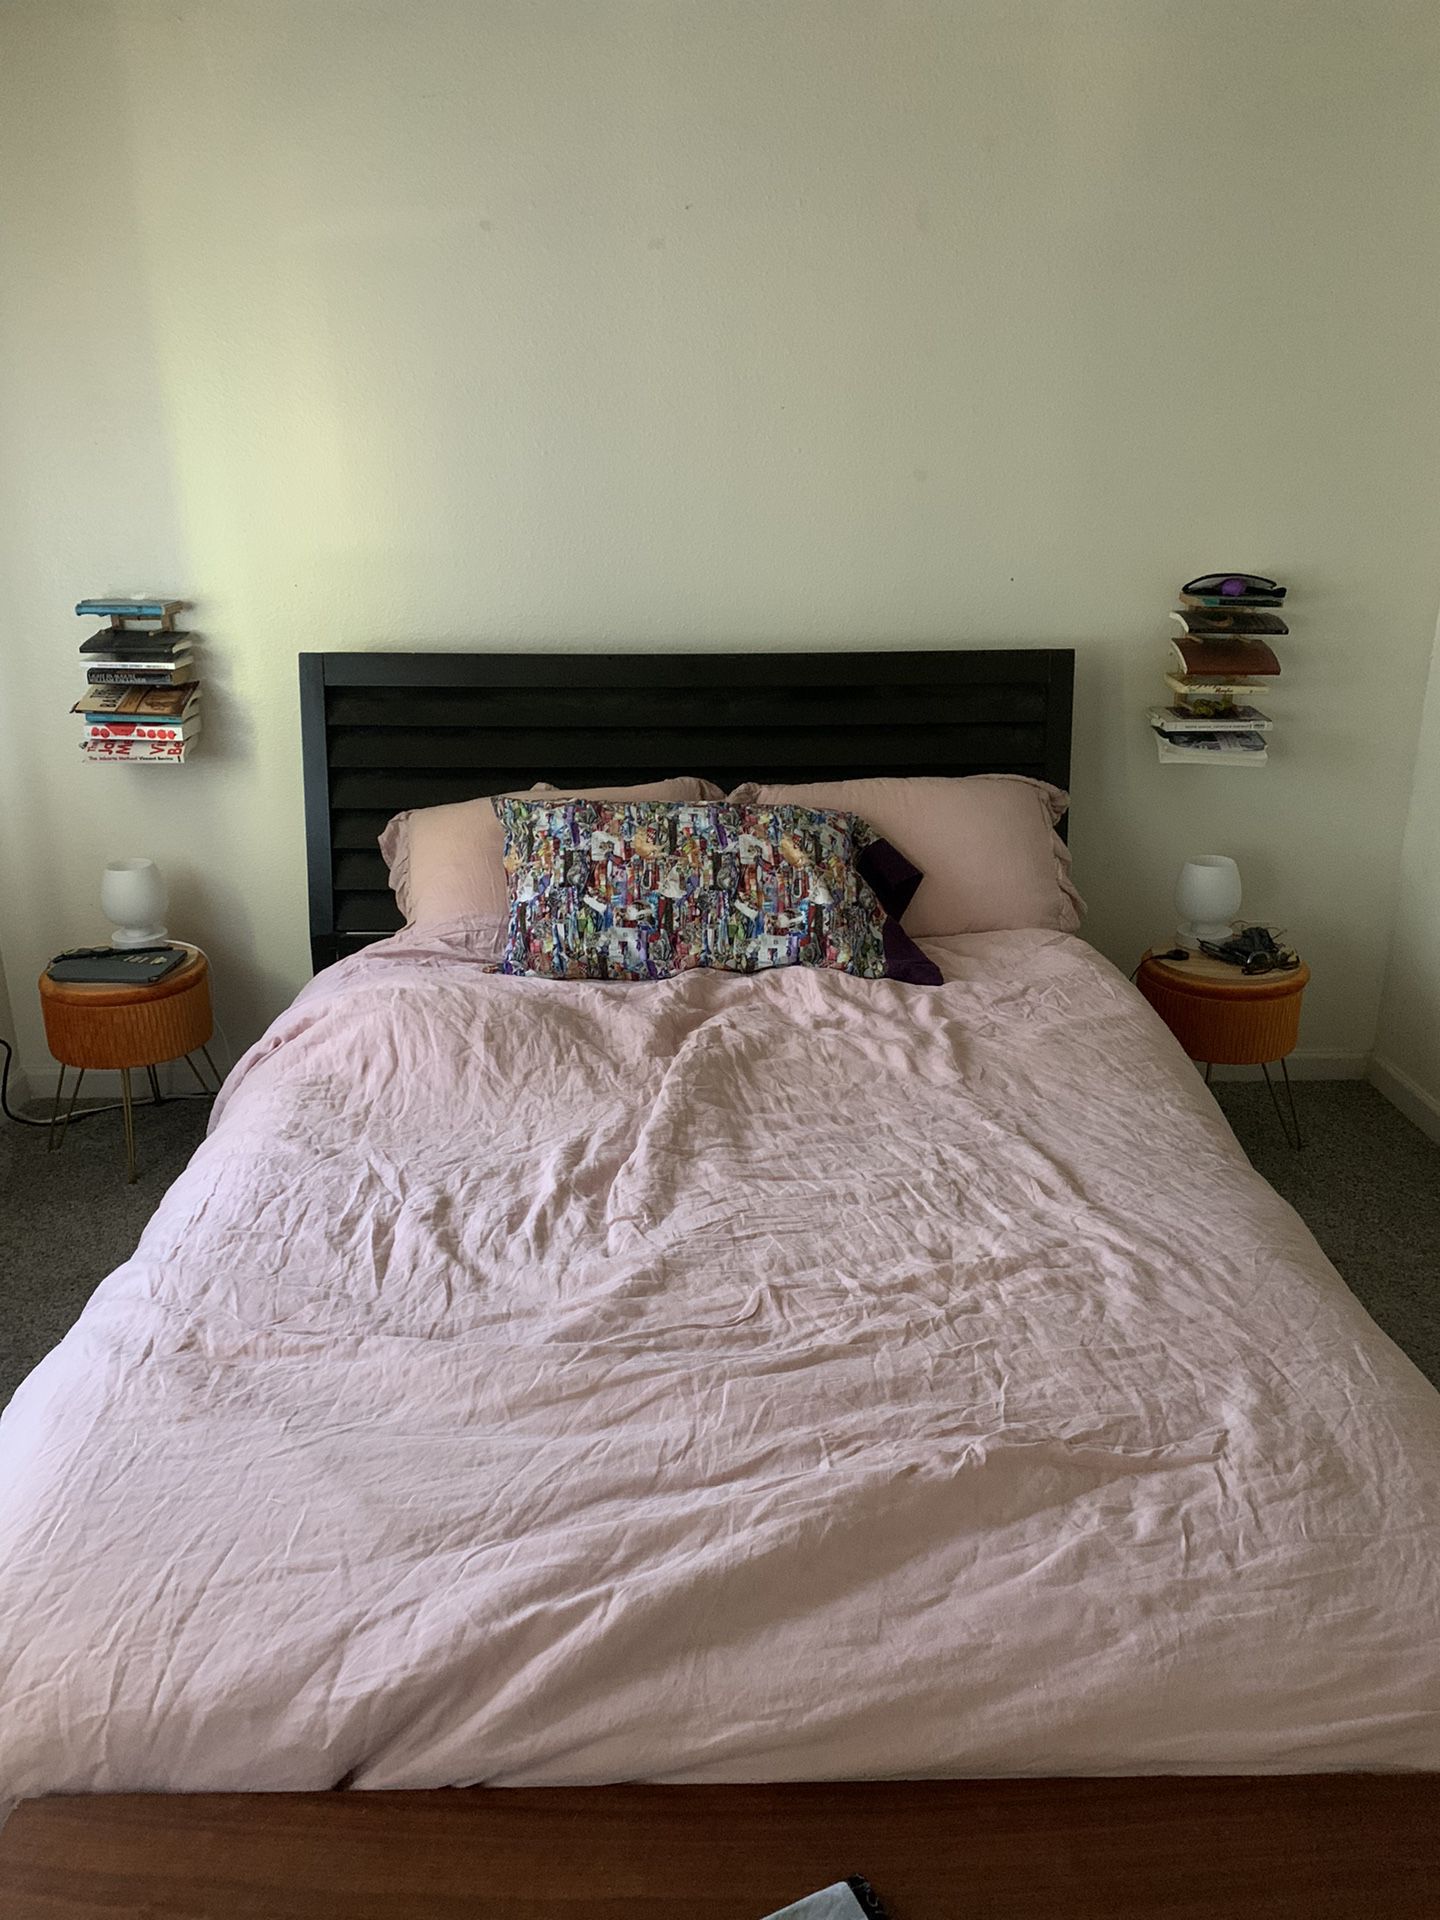 Free Queen Mattress And Bed Frame- Must Pick Up This Week (moving!)